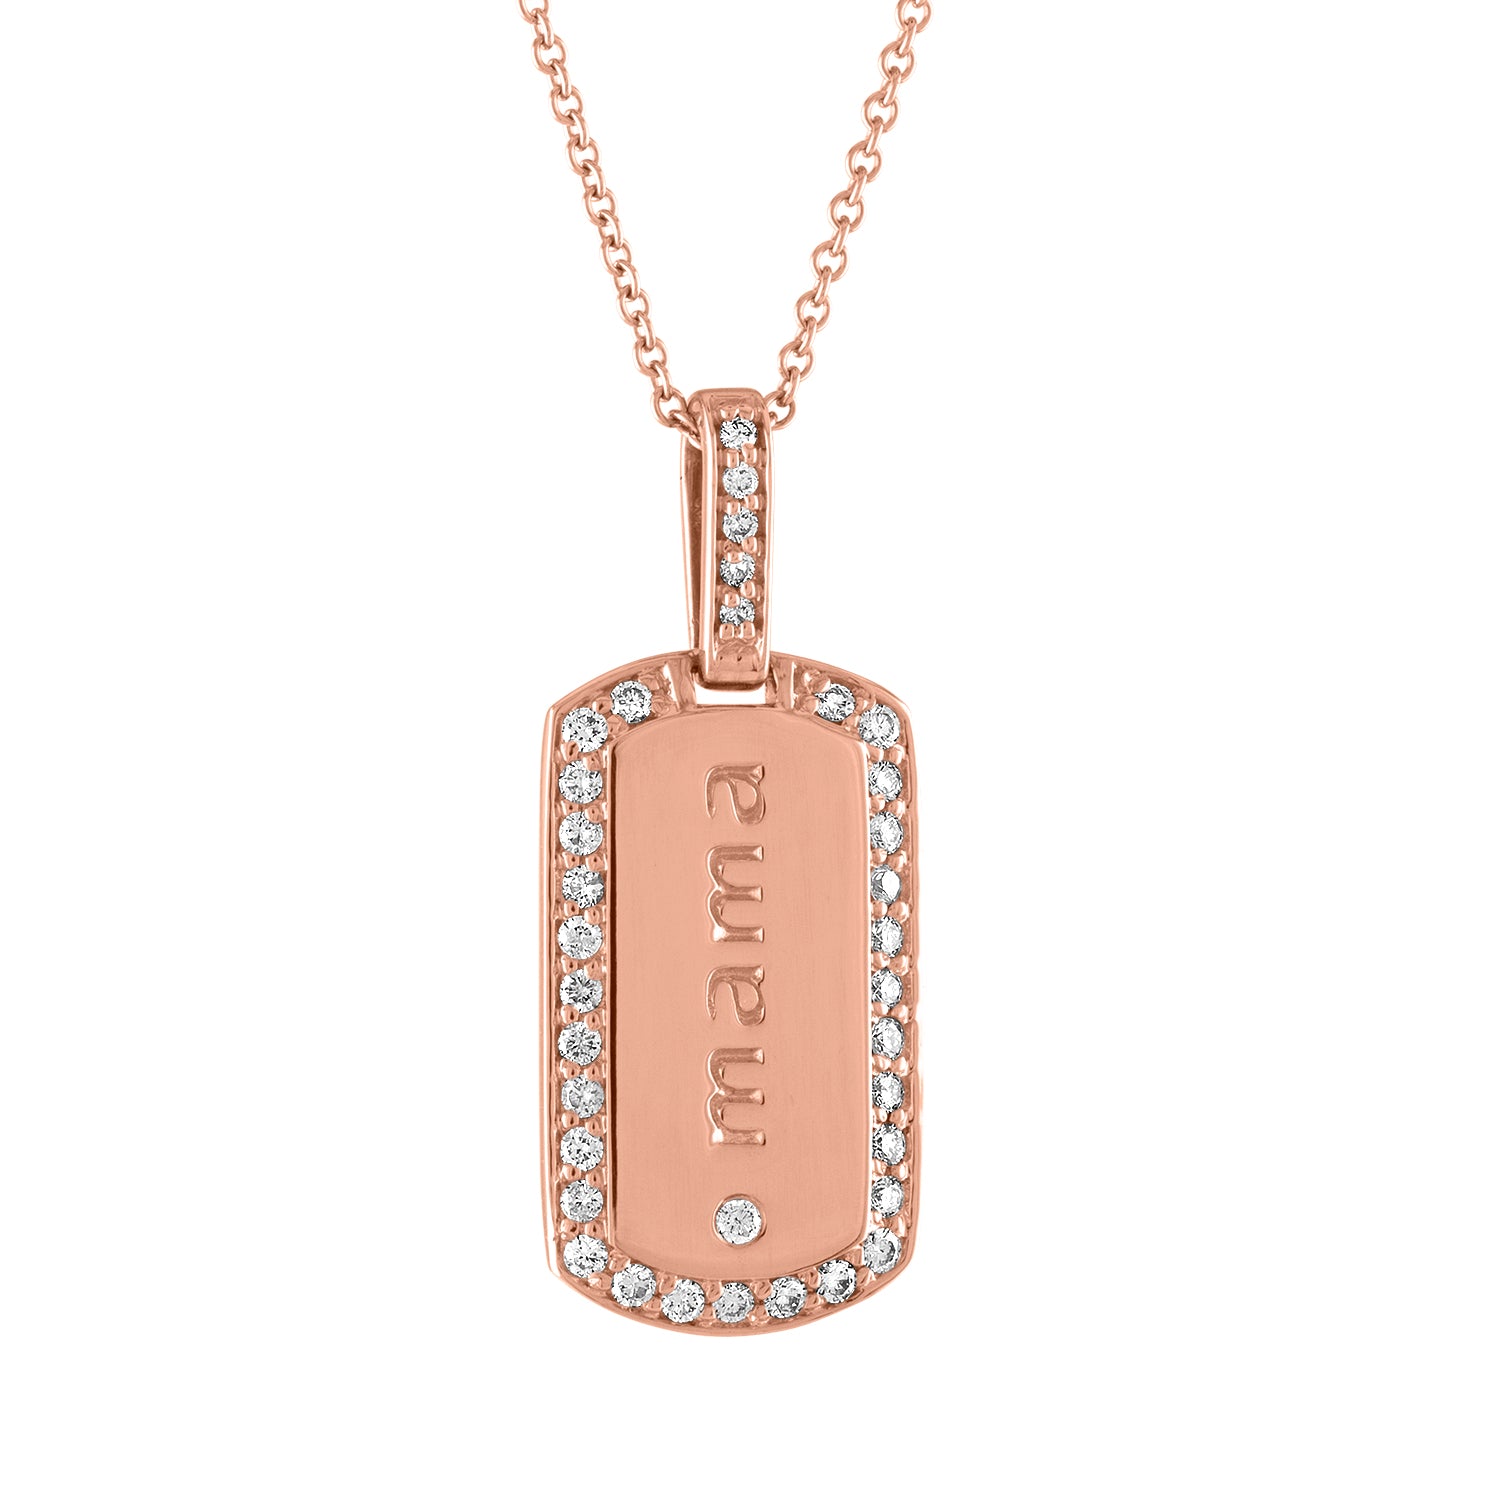 Rose gold mama dog tag necklace with round diamonds around the border. 